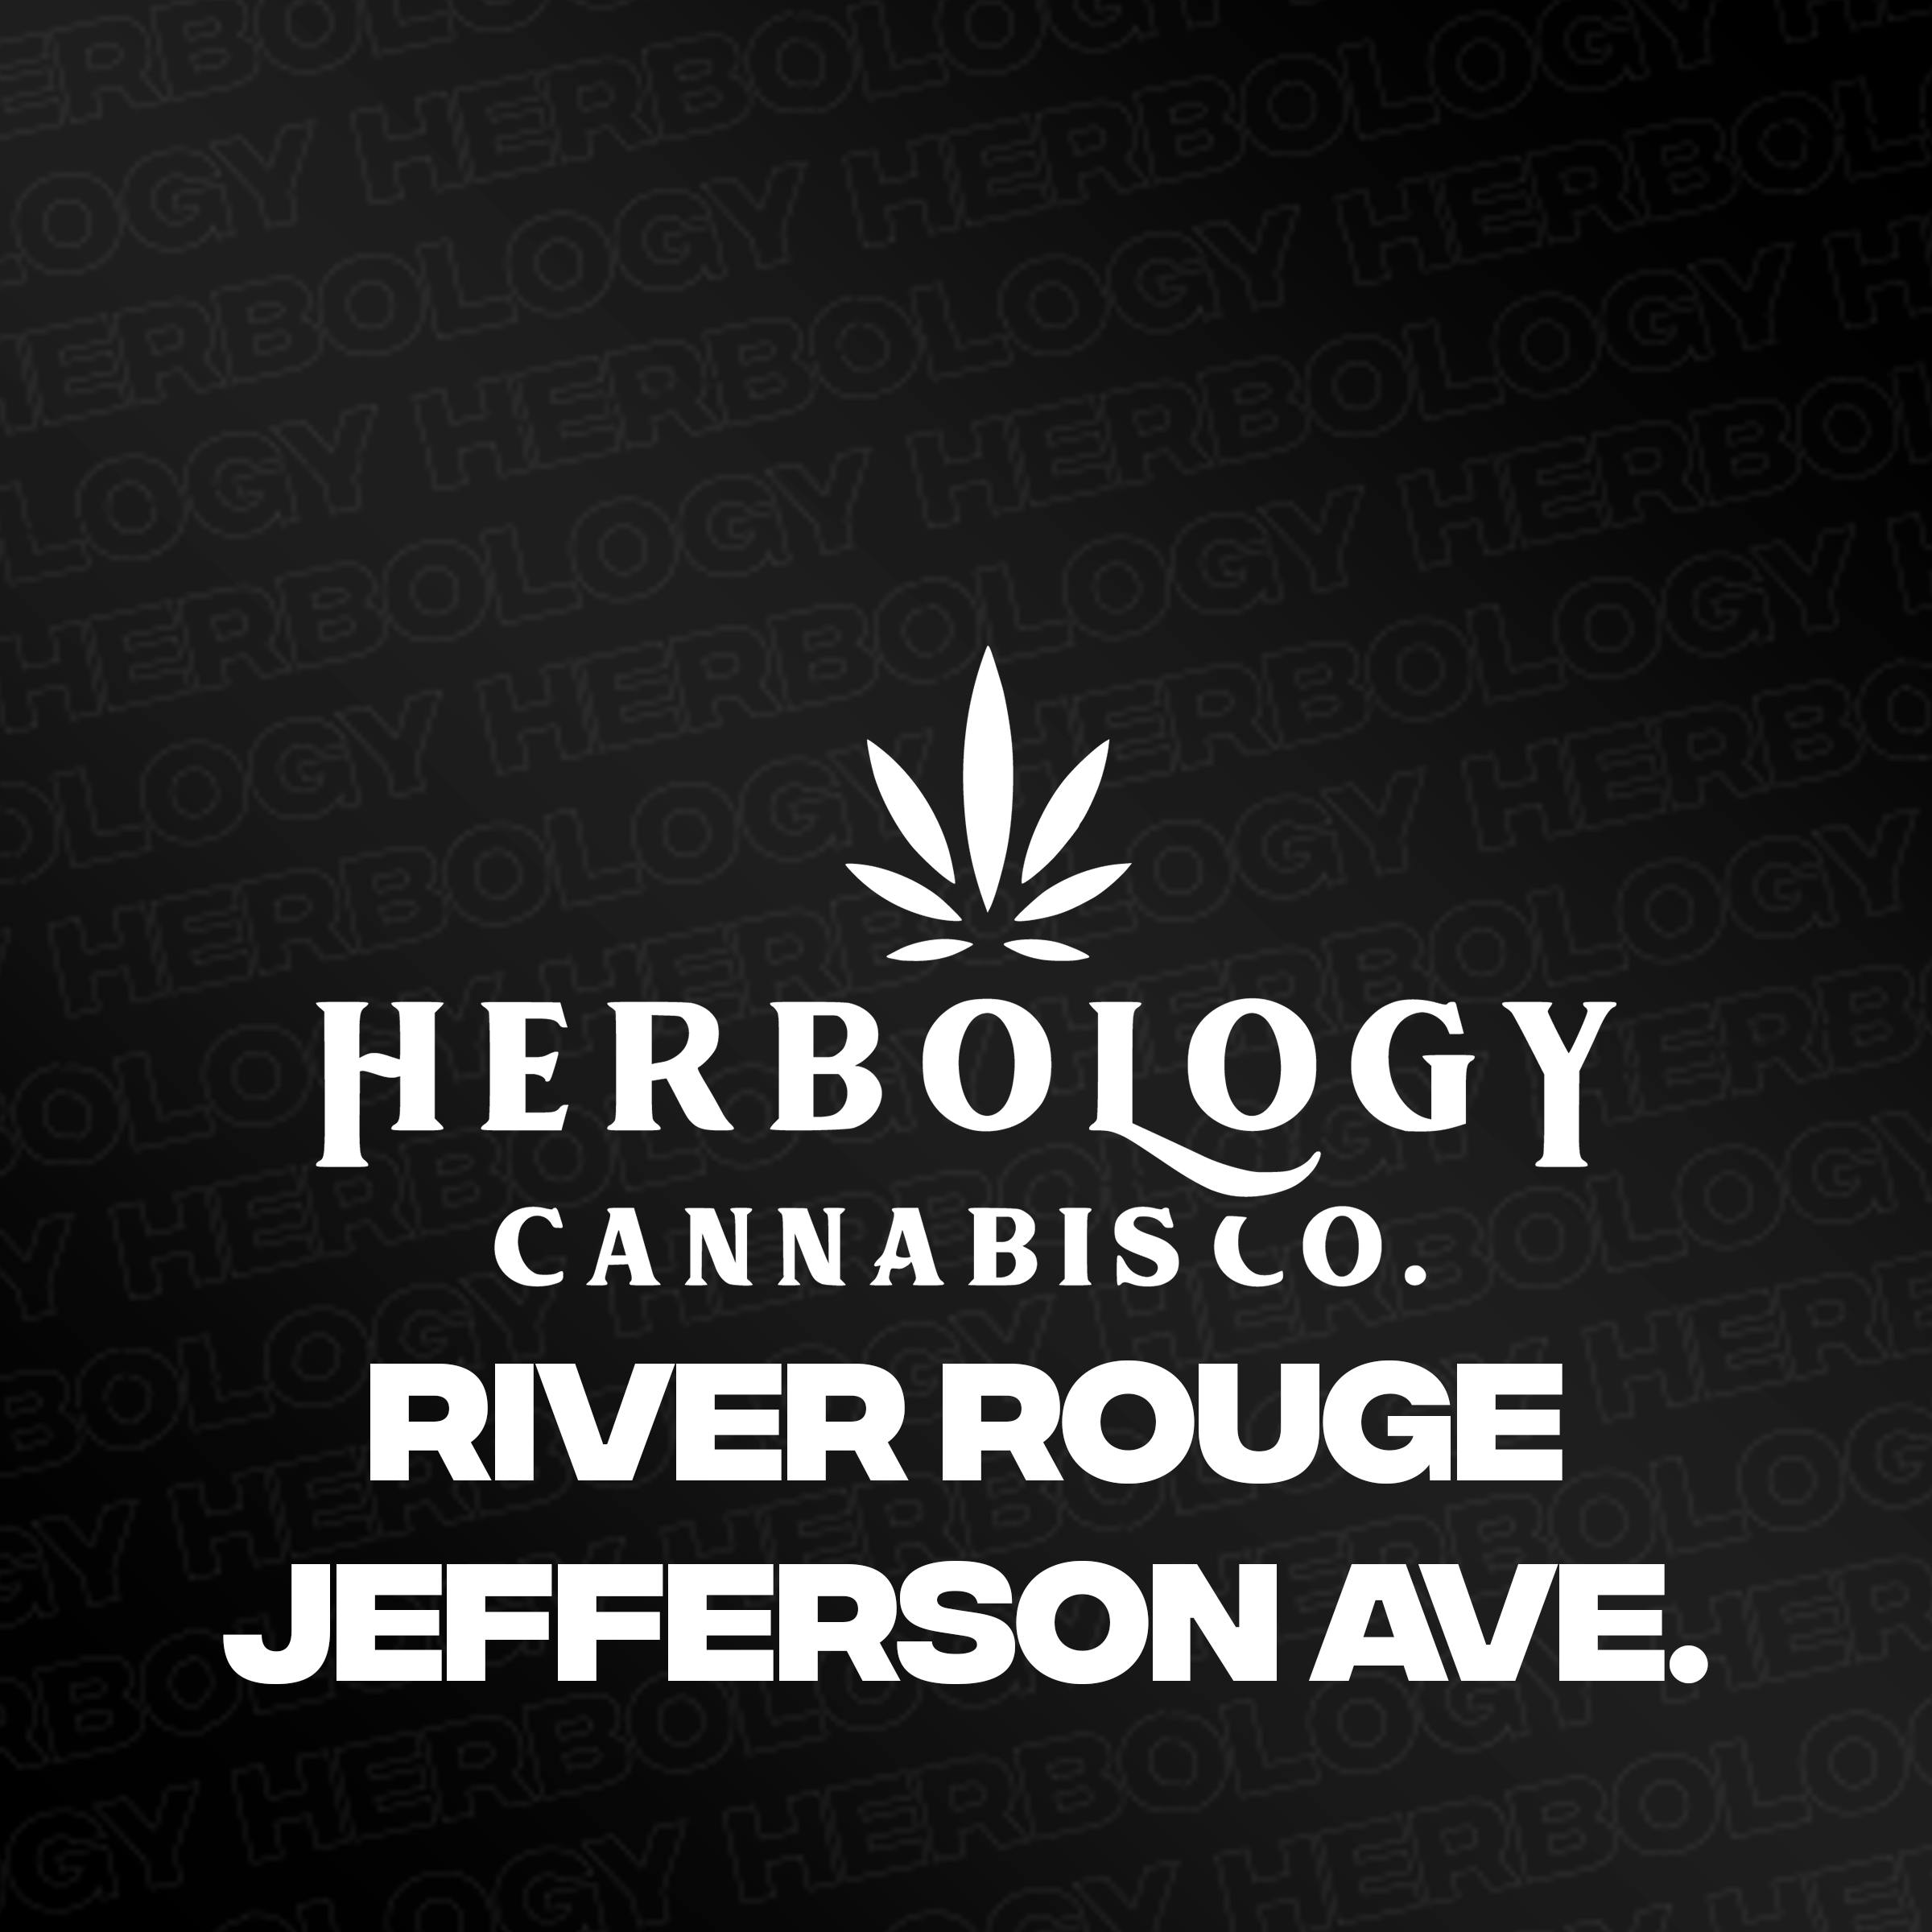 Herbology Cannabis Co. River Rouge - Jefferson Ave. - Recreational Cannabis Dispensary